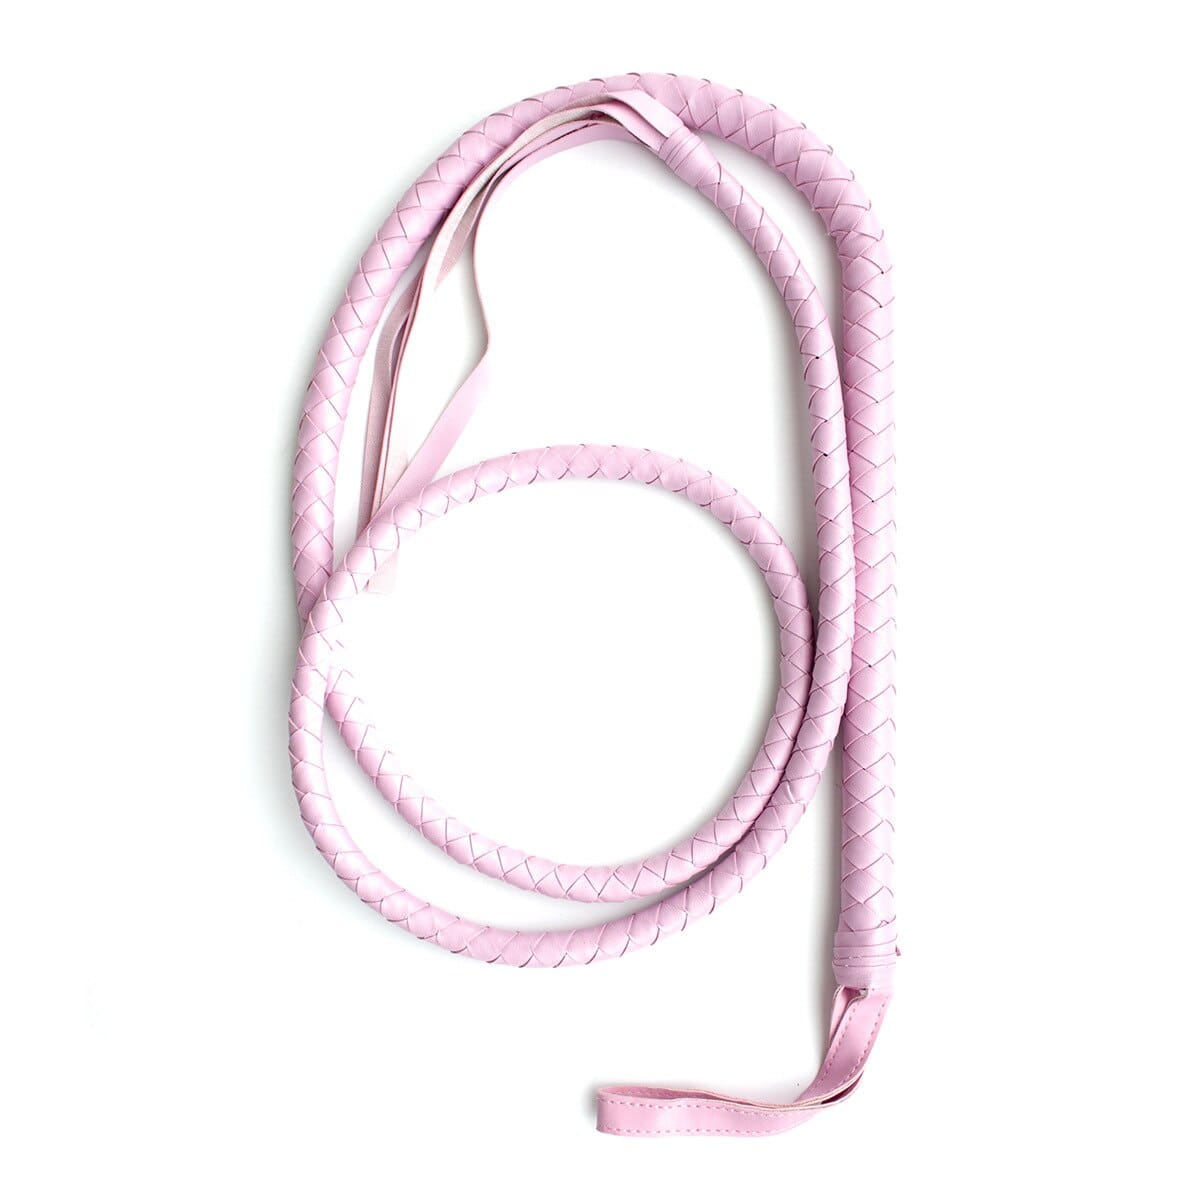 Here is an image of Braided Leather Pink Whip, a seductively rebellious tool designed to ignite desires with its plush, braided PU leather tail in a playful pink hue.